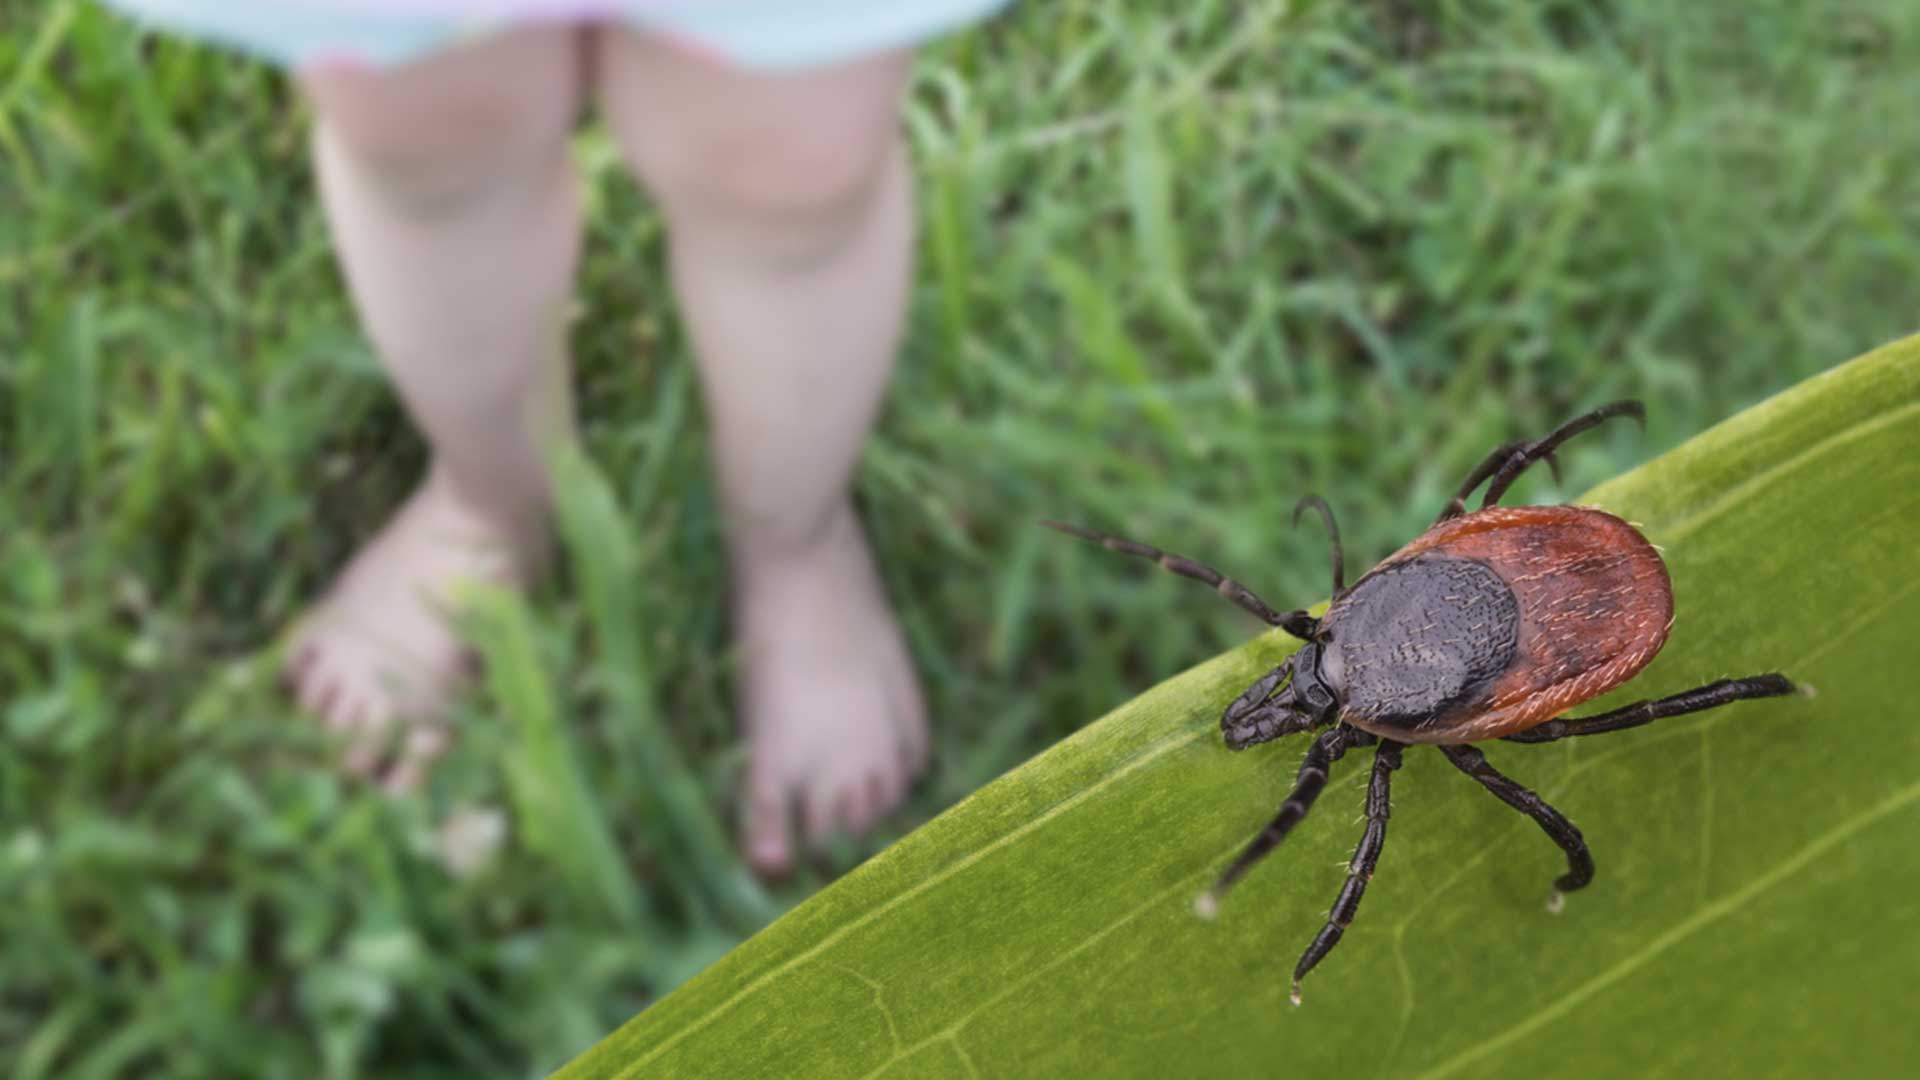 tick crawling on plant leaf with kid in the background